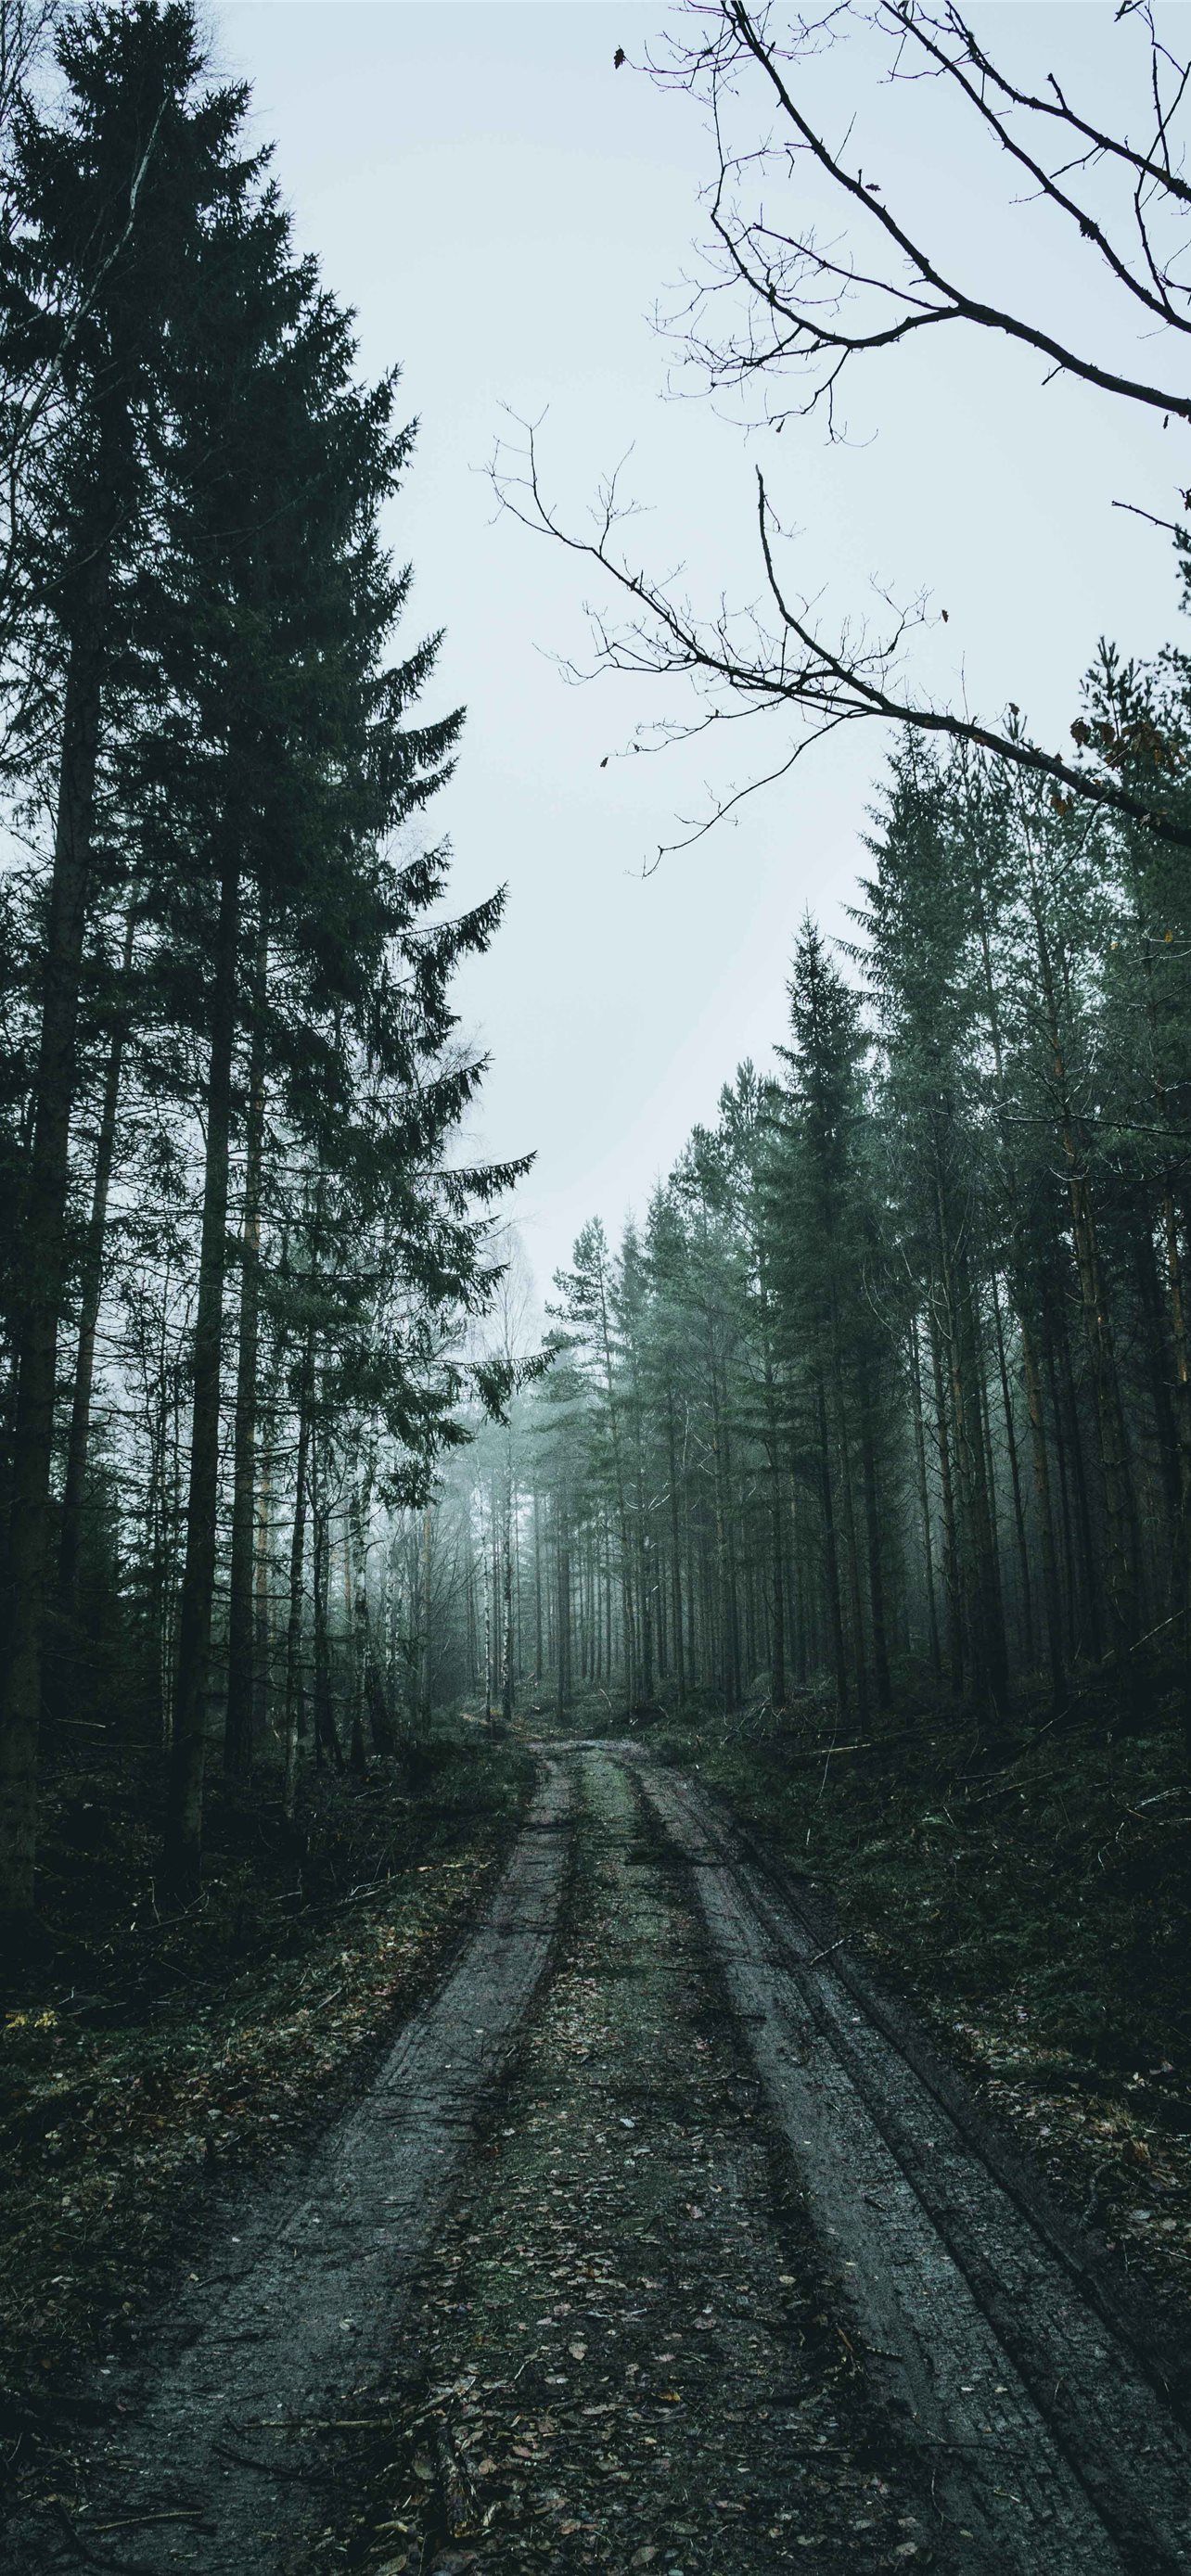 A foggy forest with a dirt road - Forest, woods